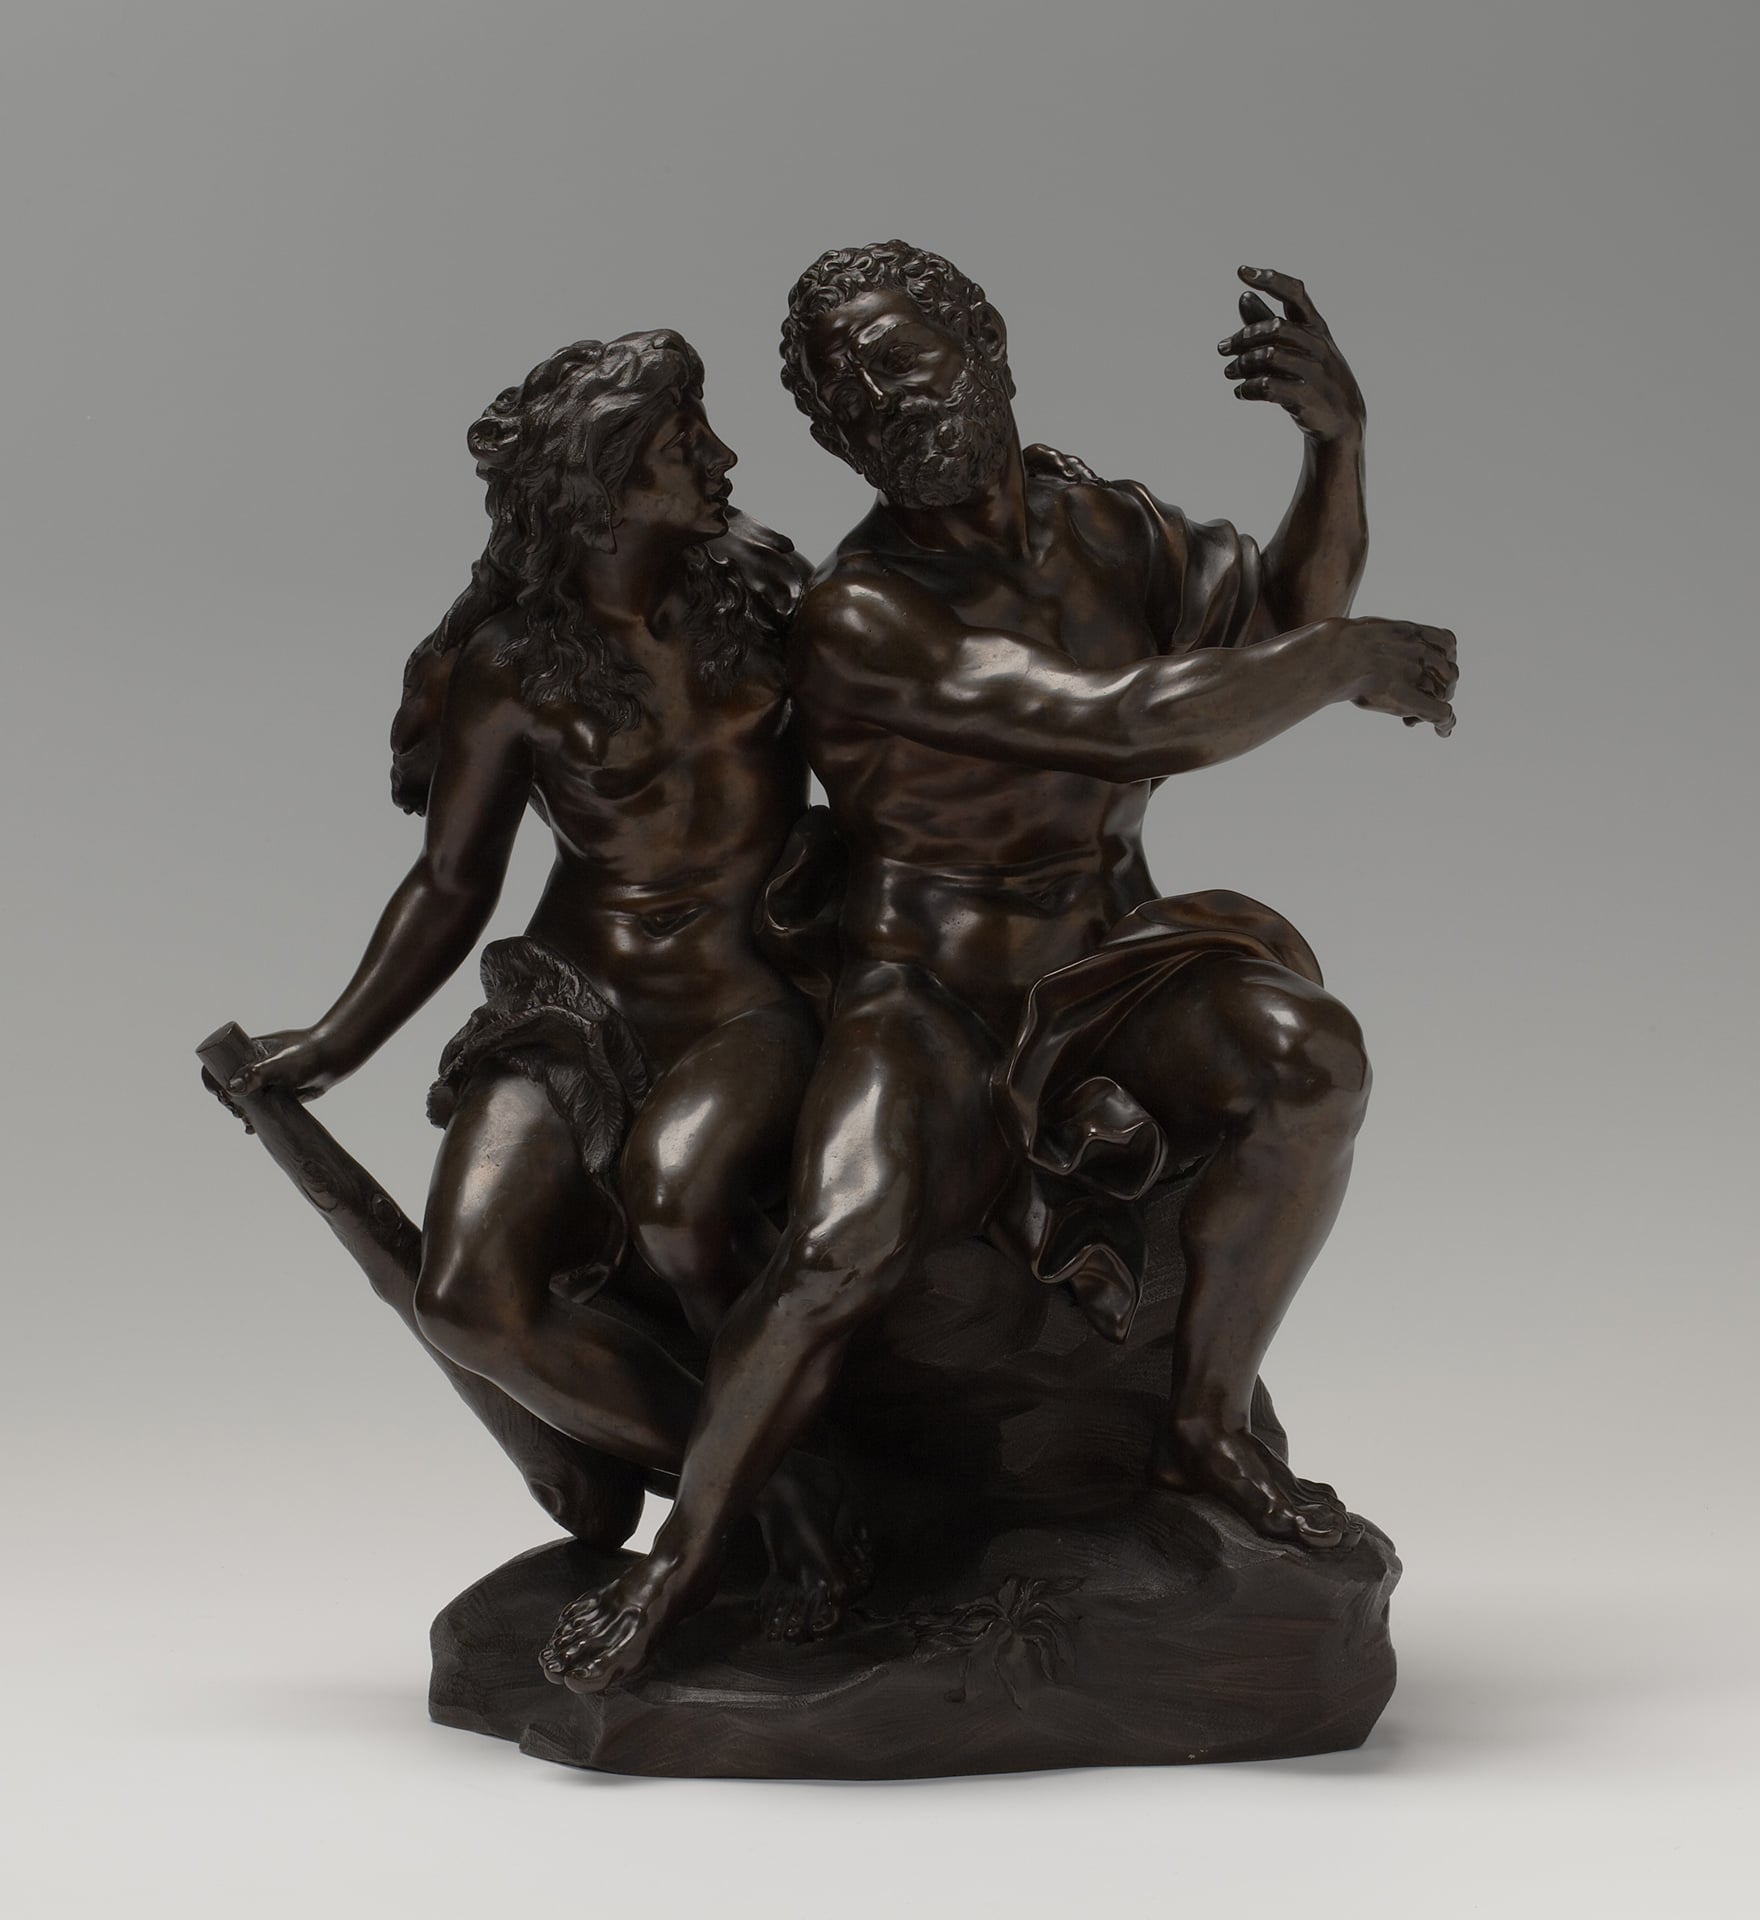 a bronze sculpture of a seated man and woman conversing with each other